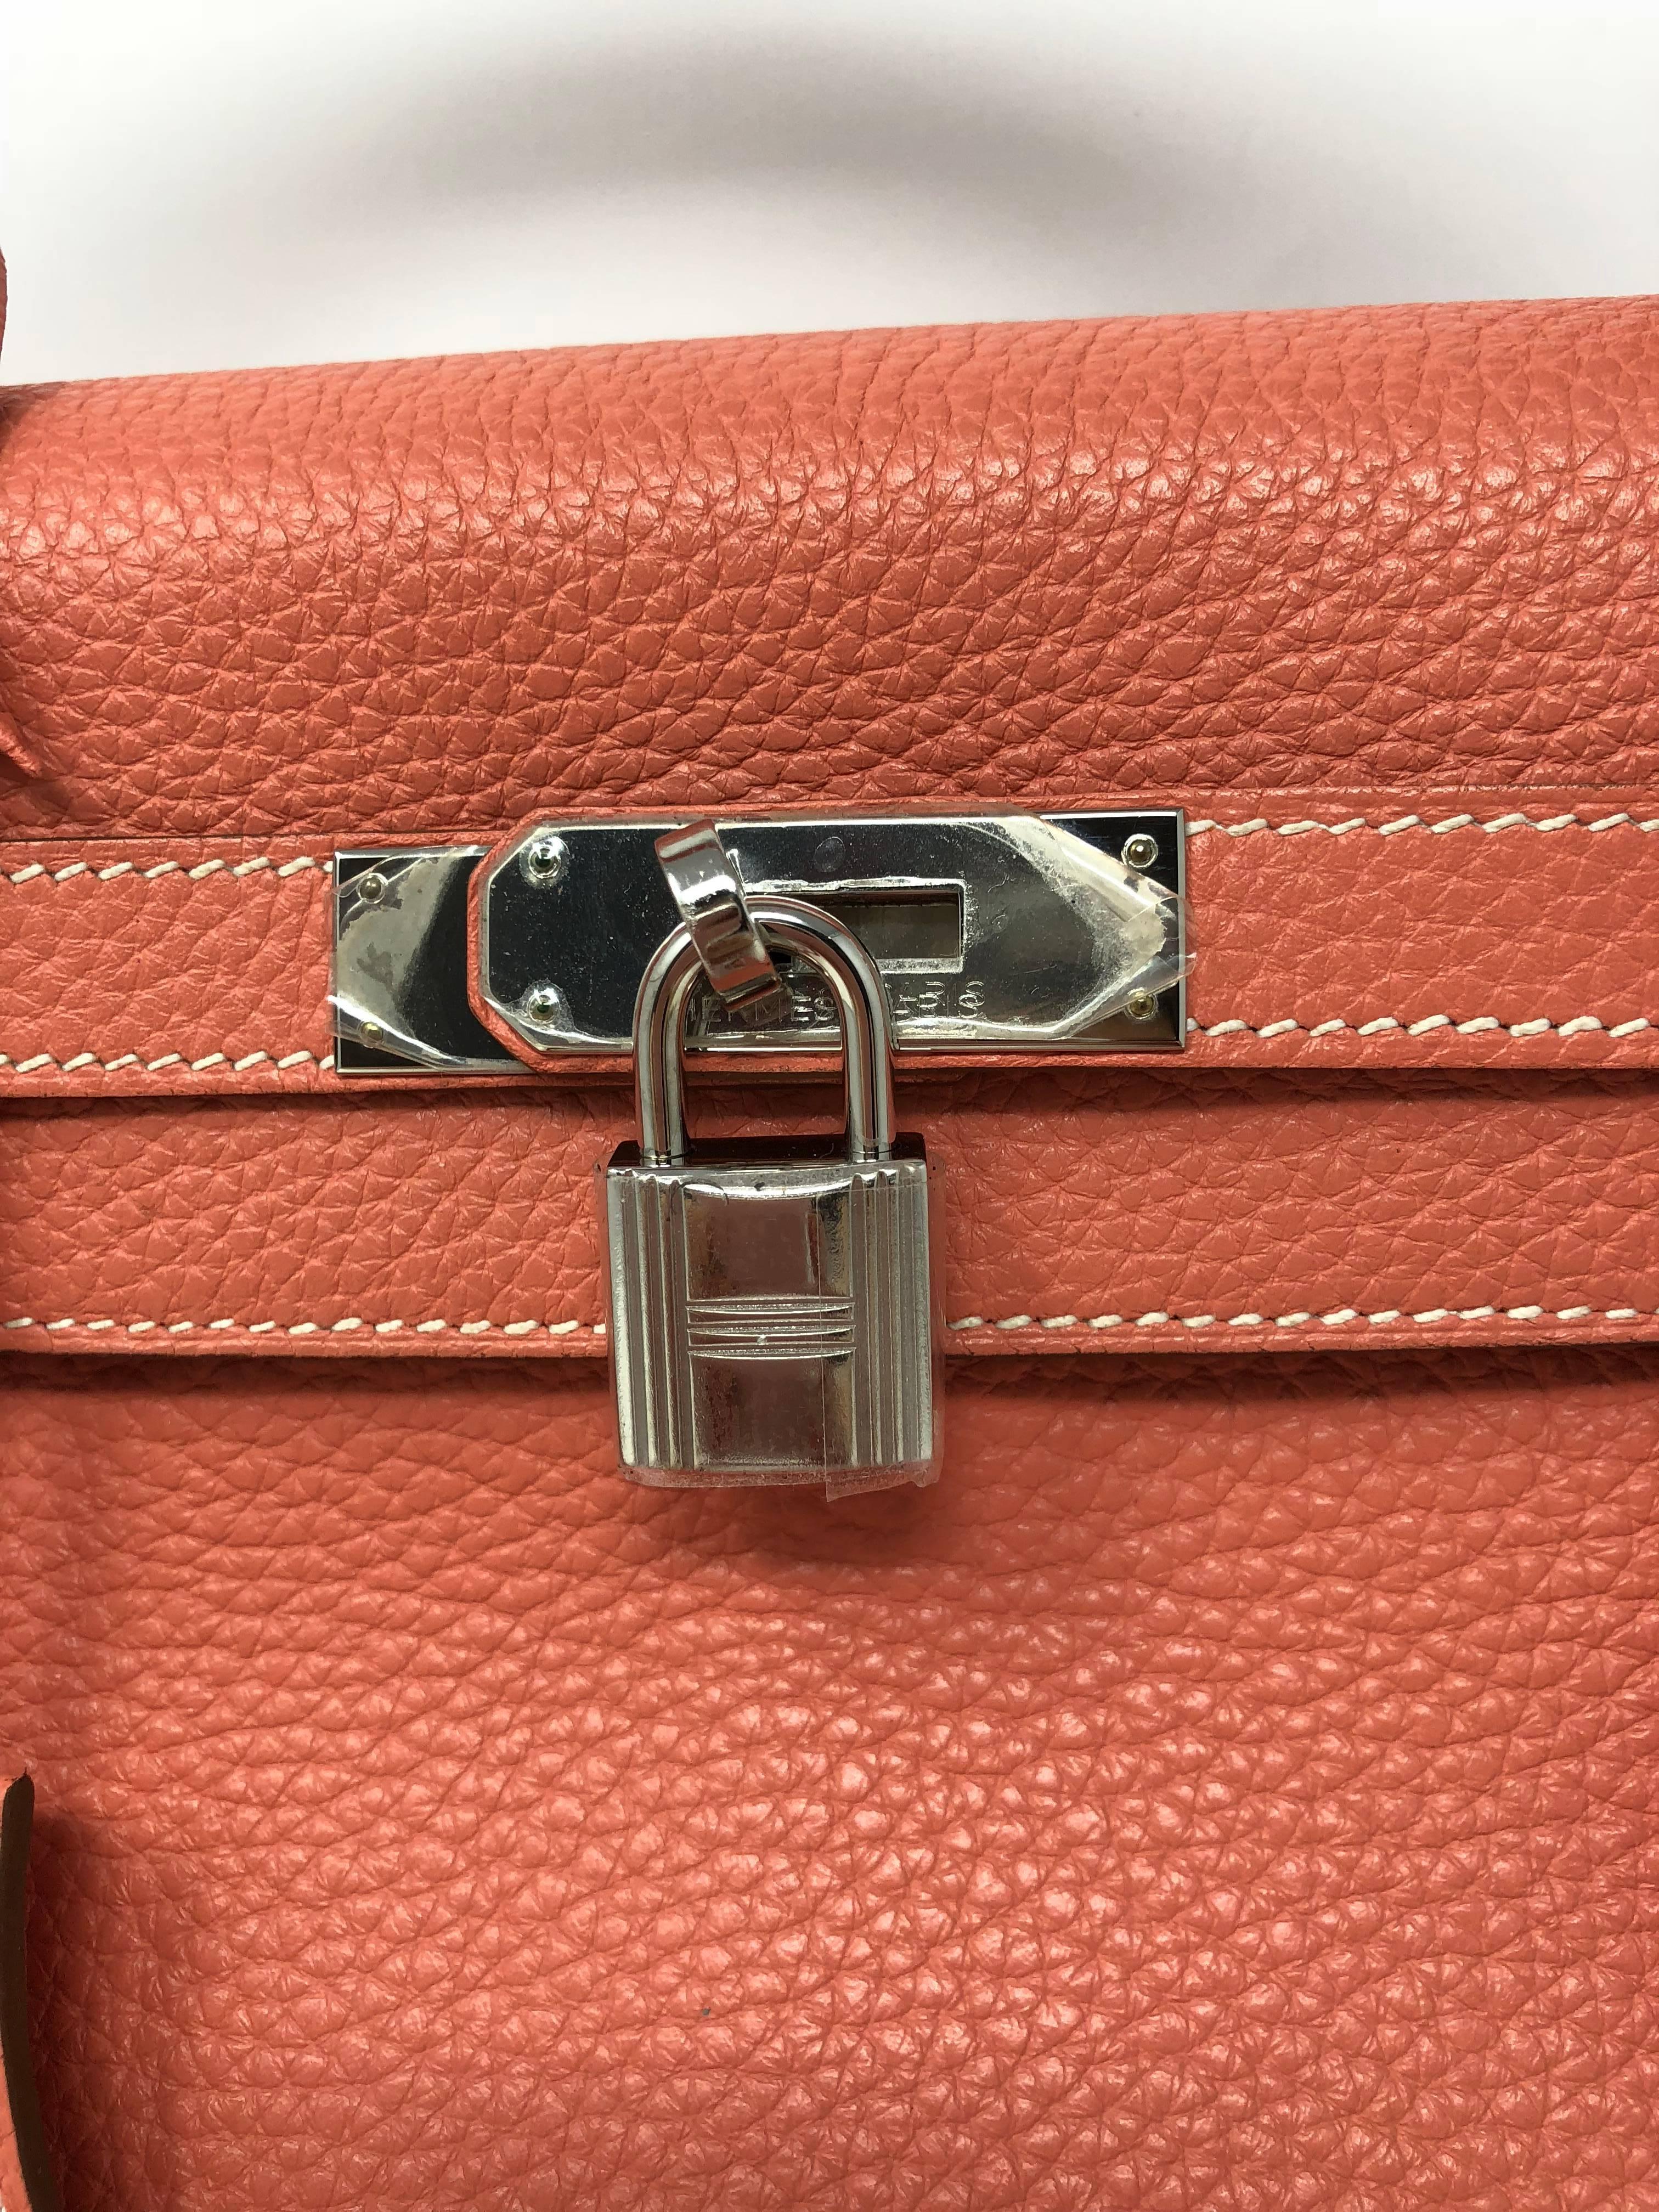 Hermes Kelly Retourne 35 in Crevette pink color. Made of Veau taurillon Clemence leather and palladium hardware. Q square made in 2013. Kelly bag can be worn with or without strap. Mint condition and comes with clochette, keys, and dust cover.